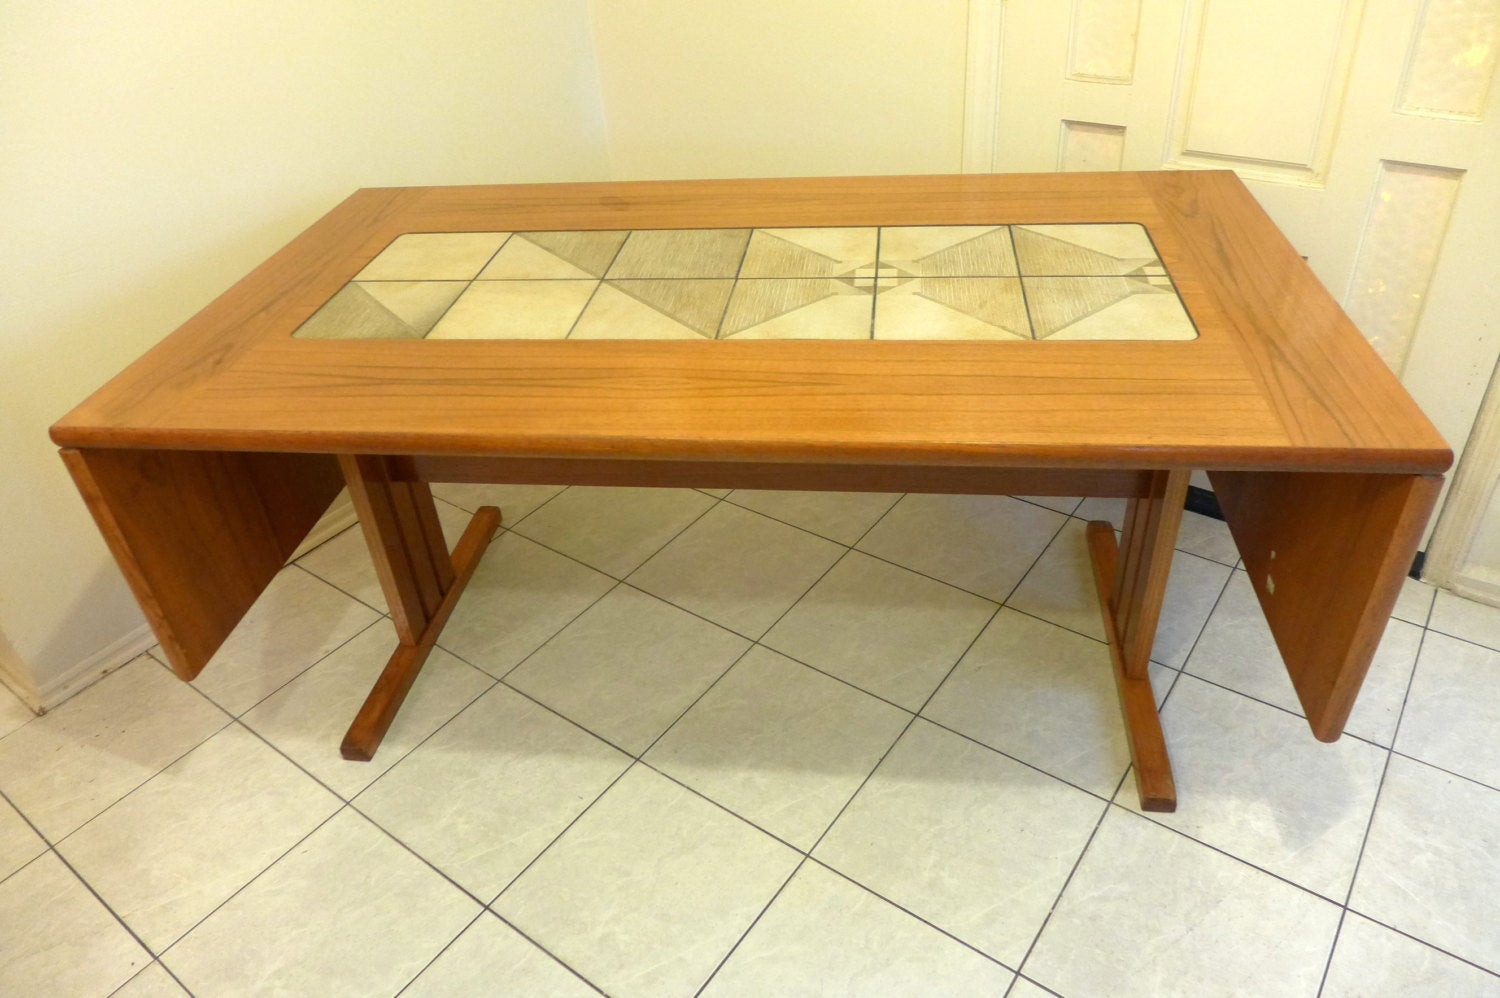 Ceramic Tile Kitchen Tables
 Ceramic tile top dining table by Jacques Adnet at 1stdibs